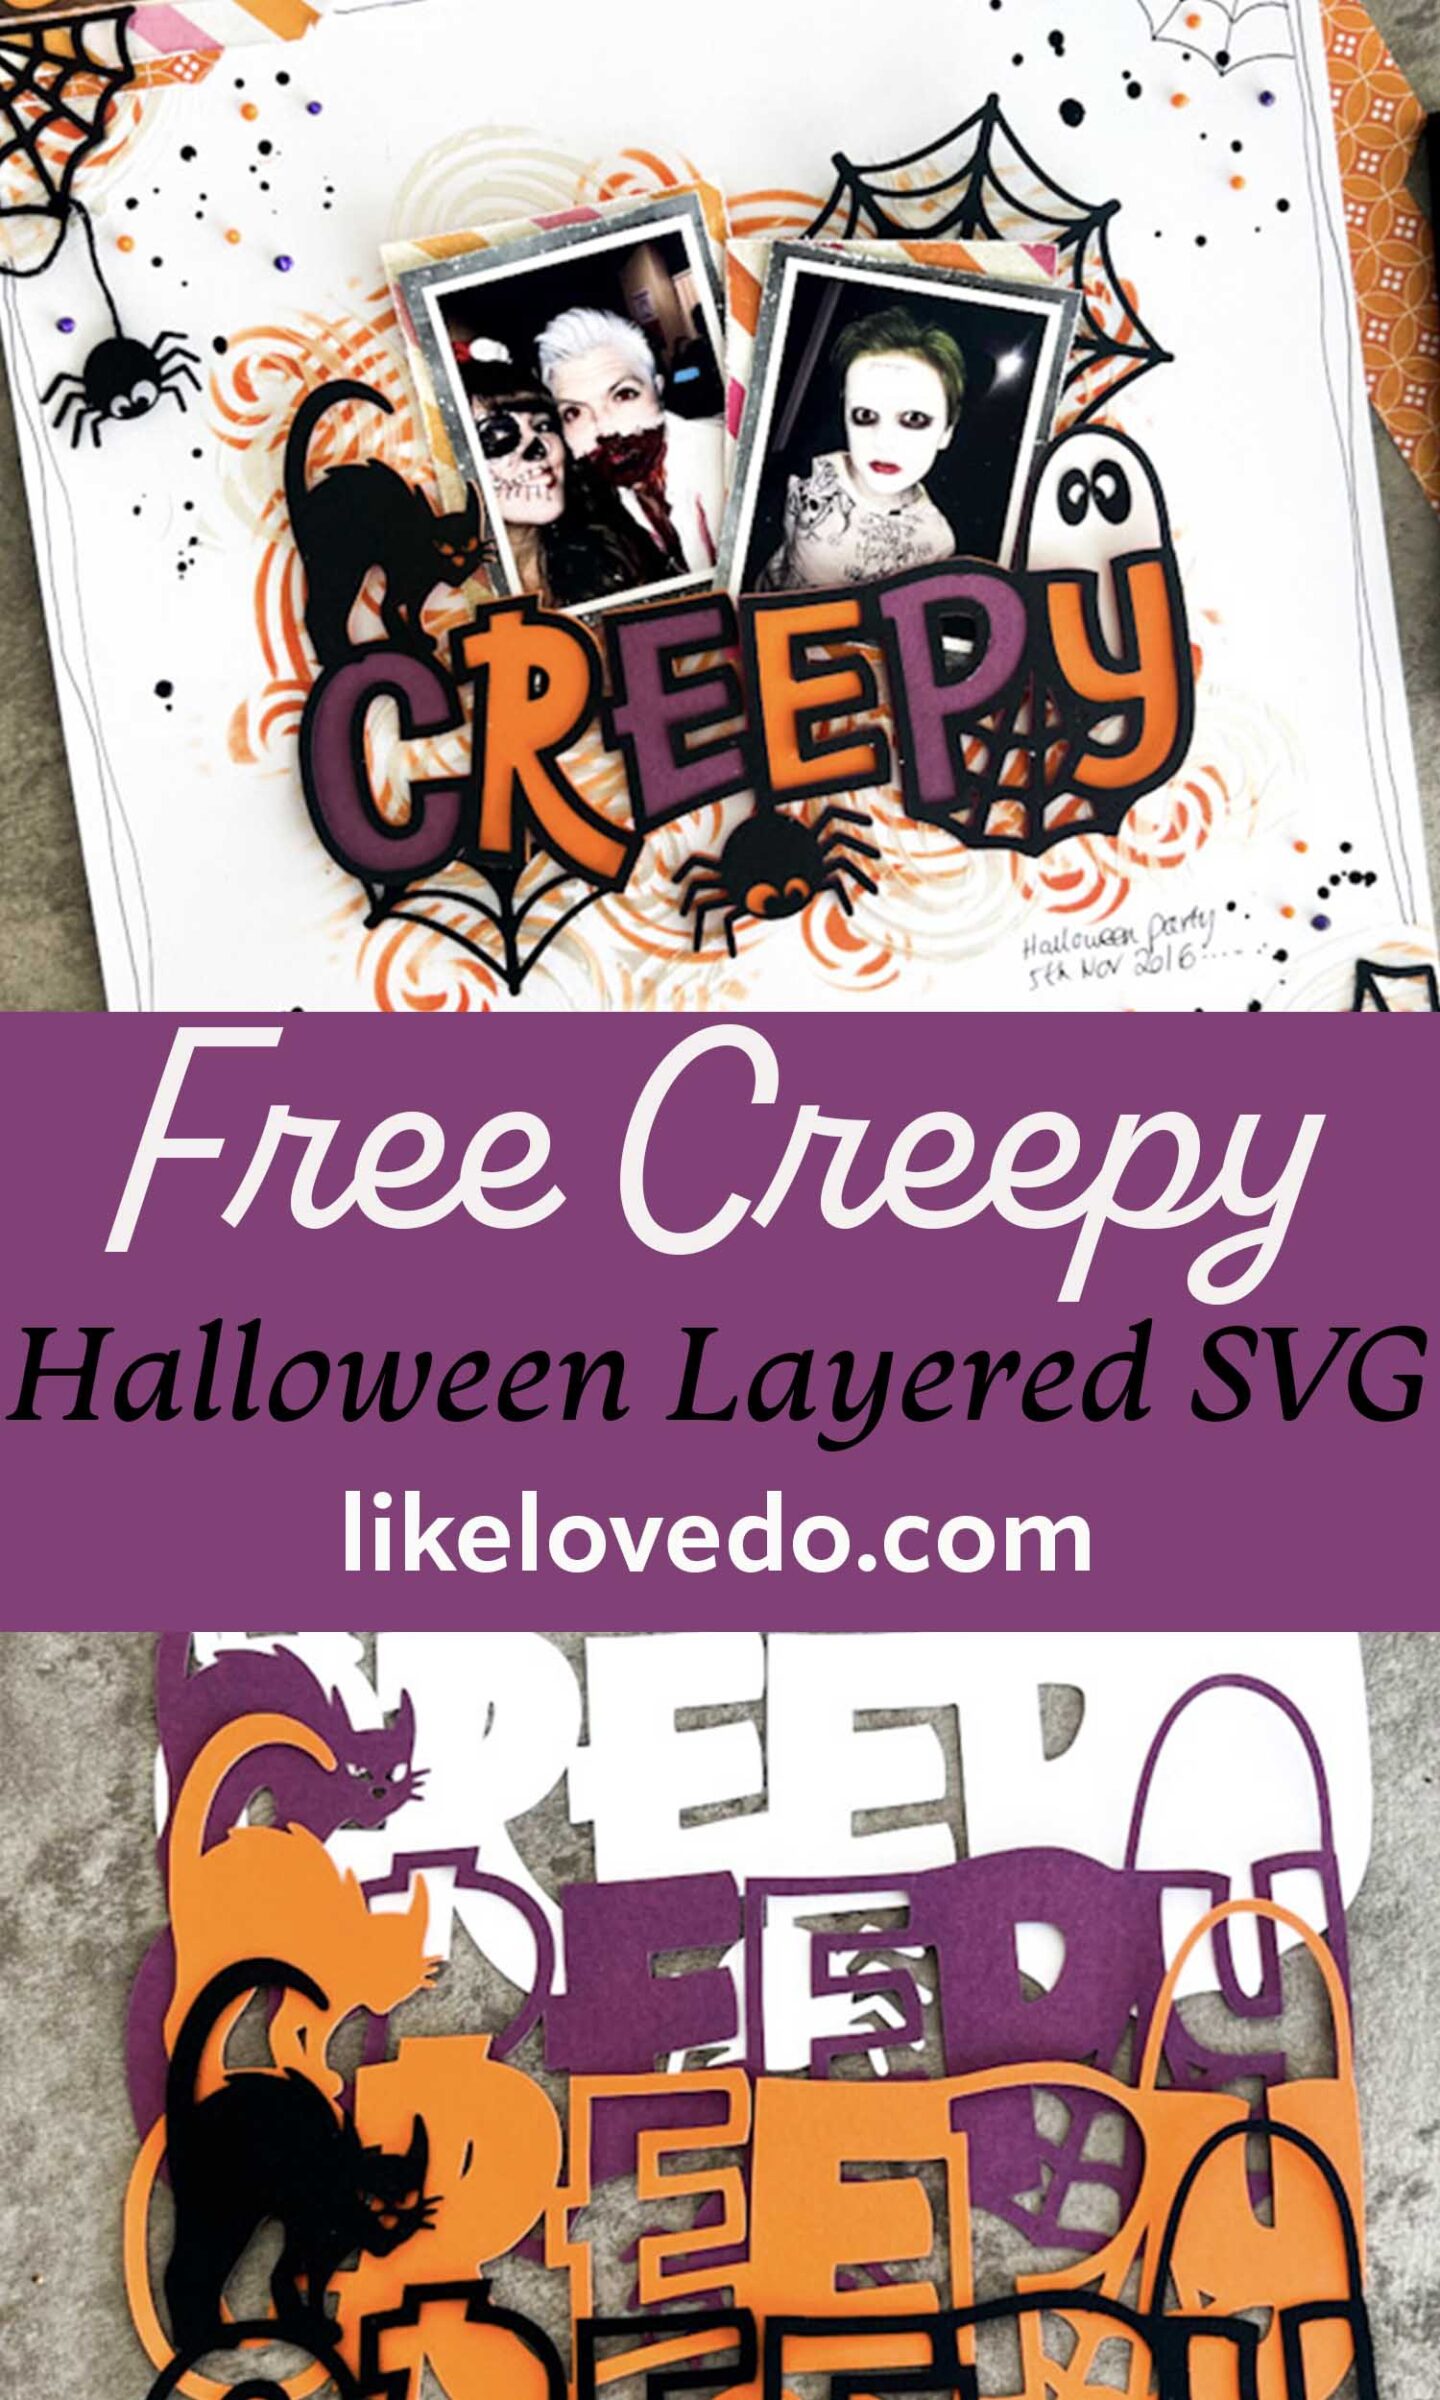 Halloween Creepy SVG Title for scrapbooking and Cricut and Silhouettes machines